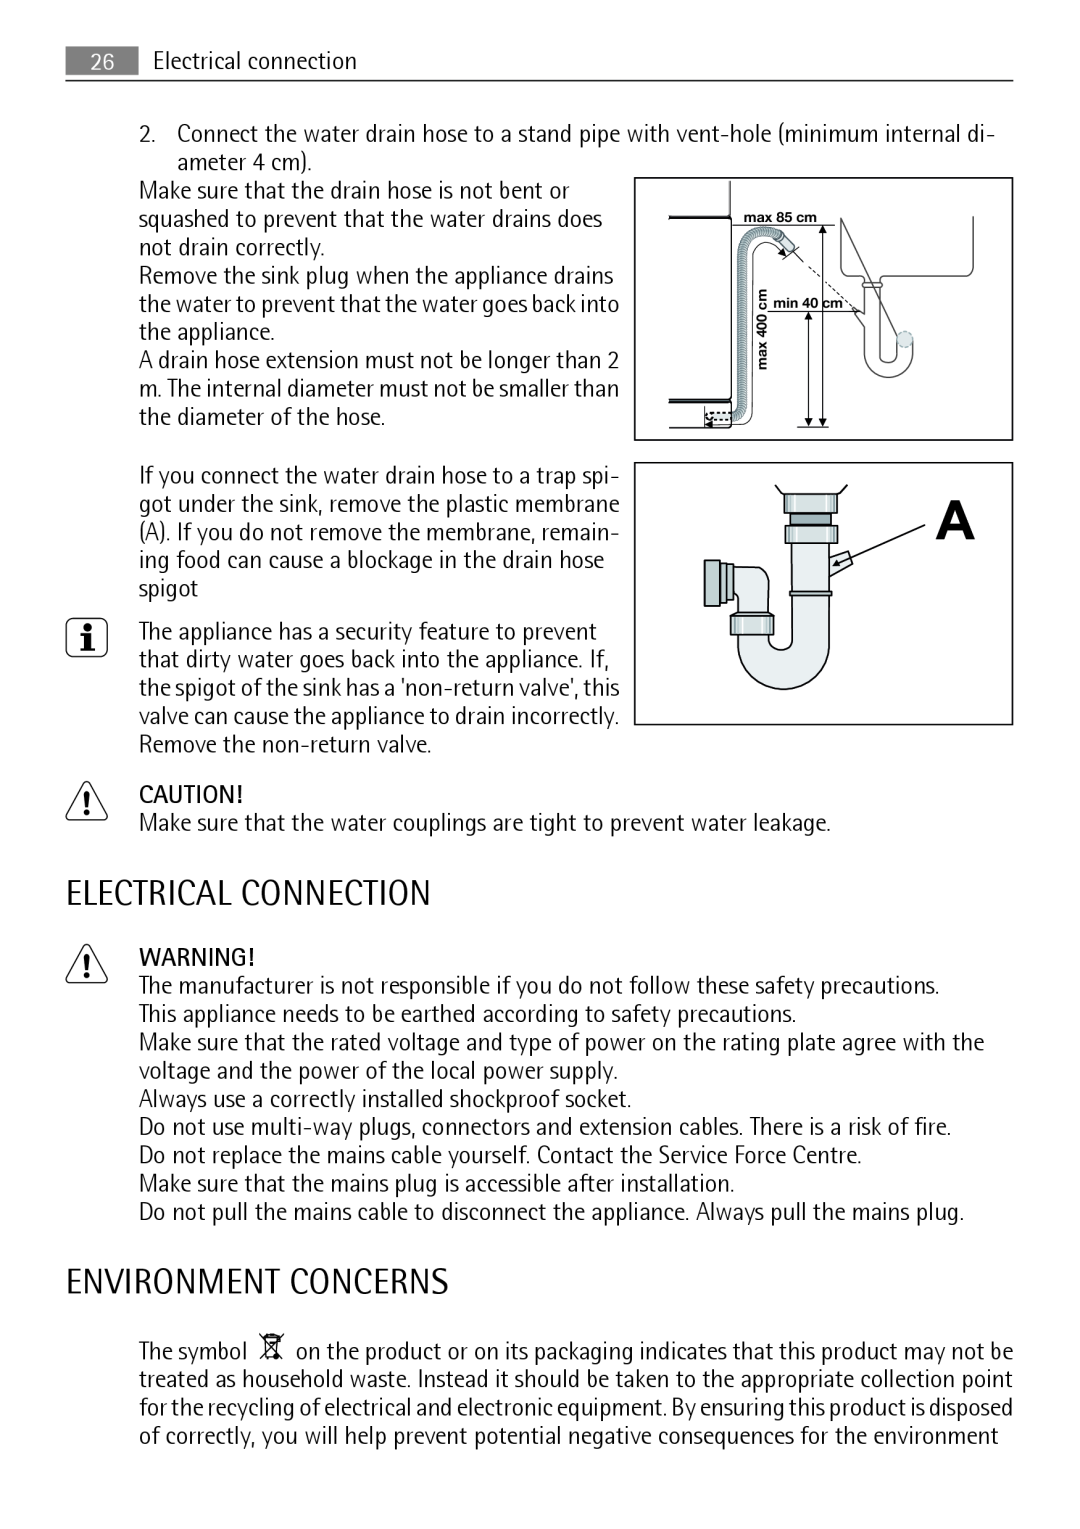 AEG 45003 user manual Electrical Connection, Environment Concerns 